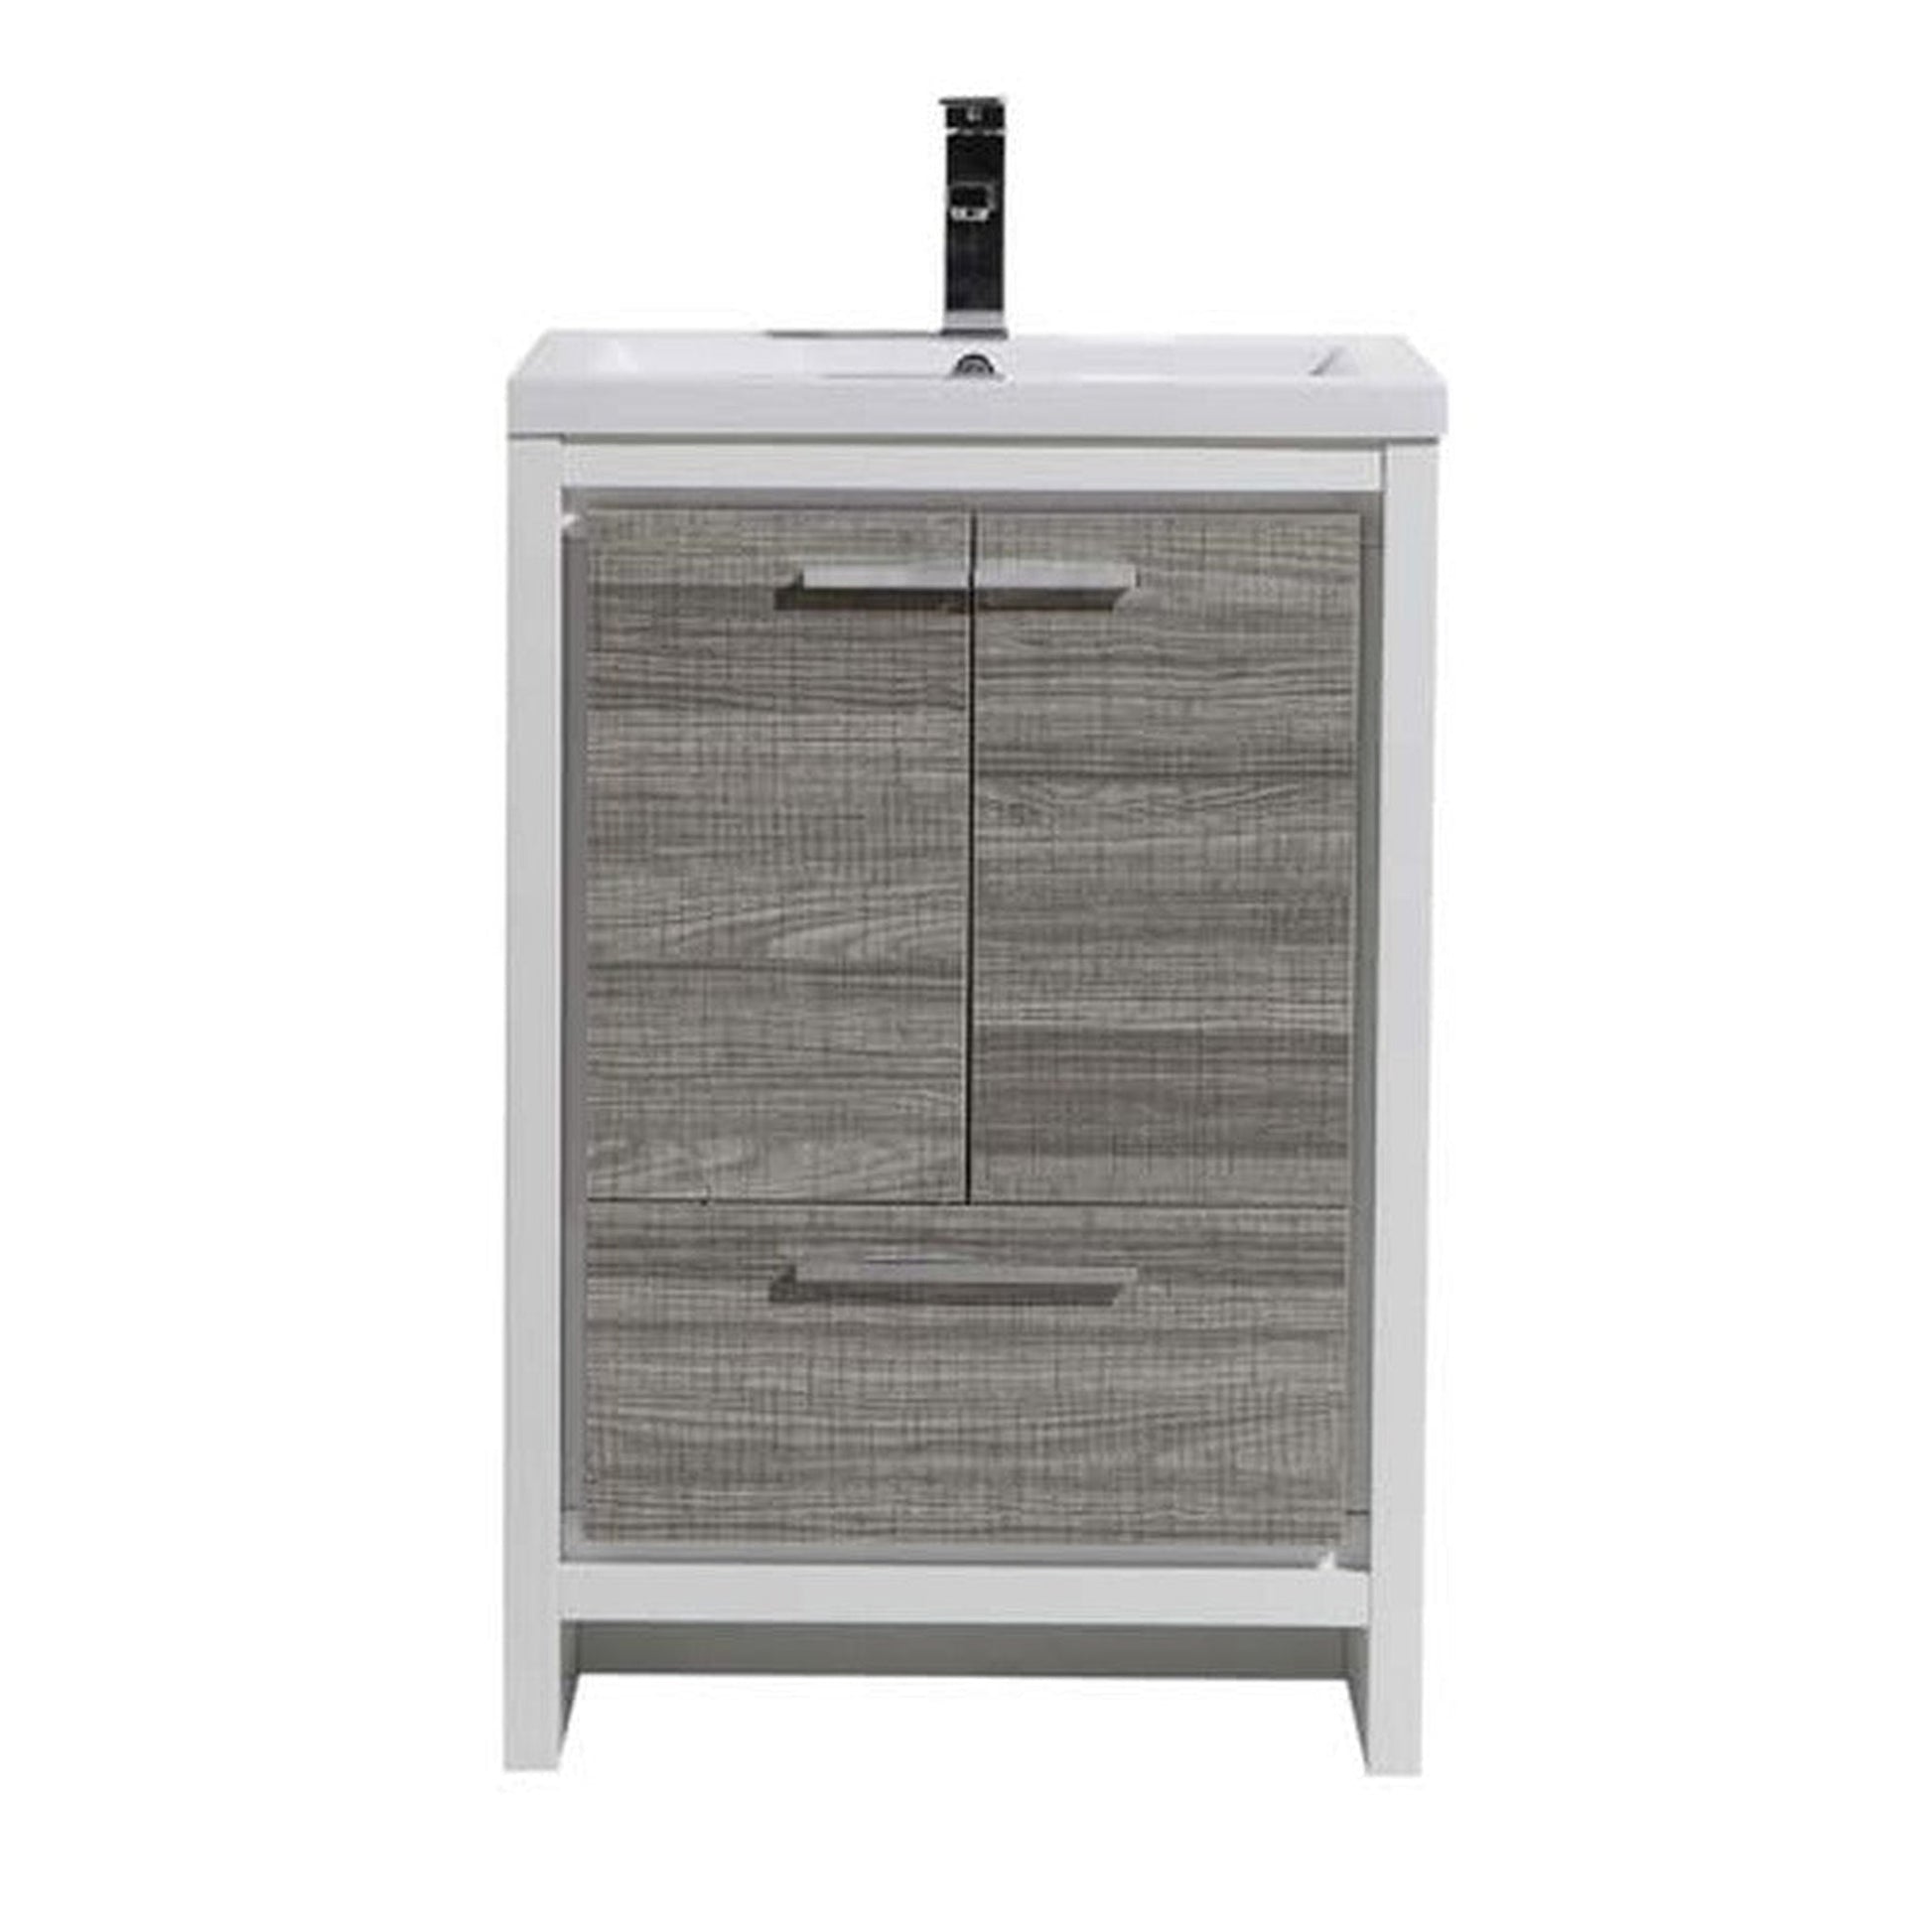 Moreno Bath Dolce 24" High Gloss Ash Gray Freestanding Vanity With Single Reinforced White Acrylic Sink